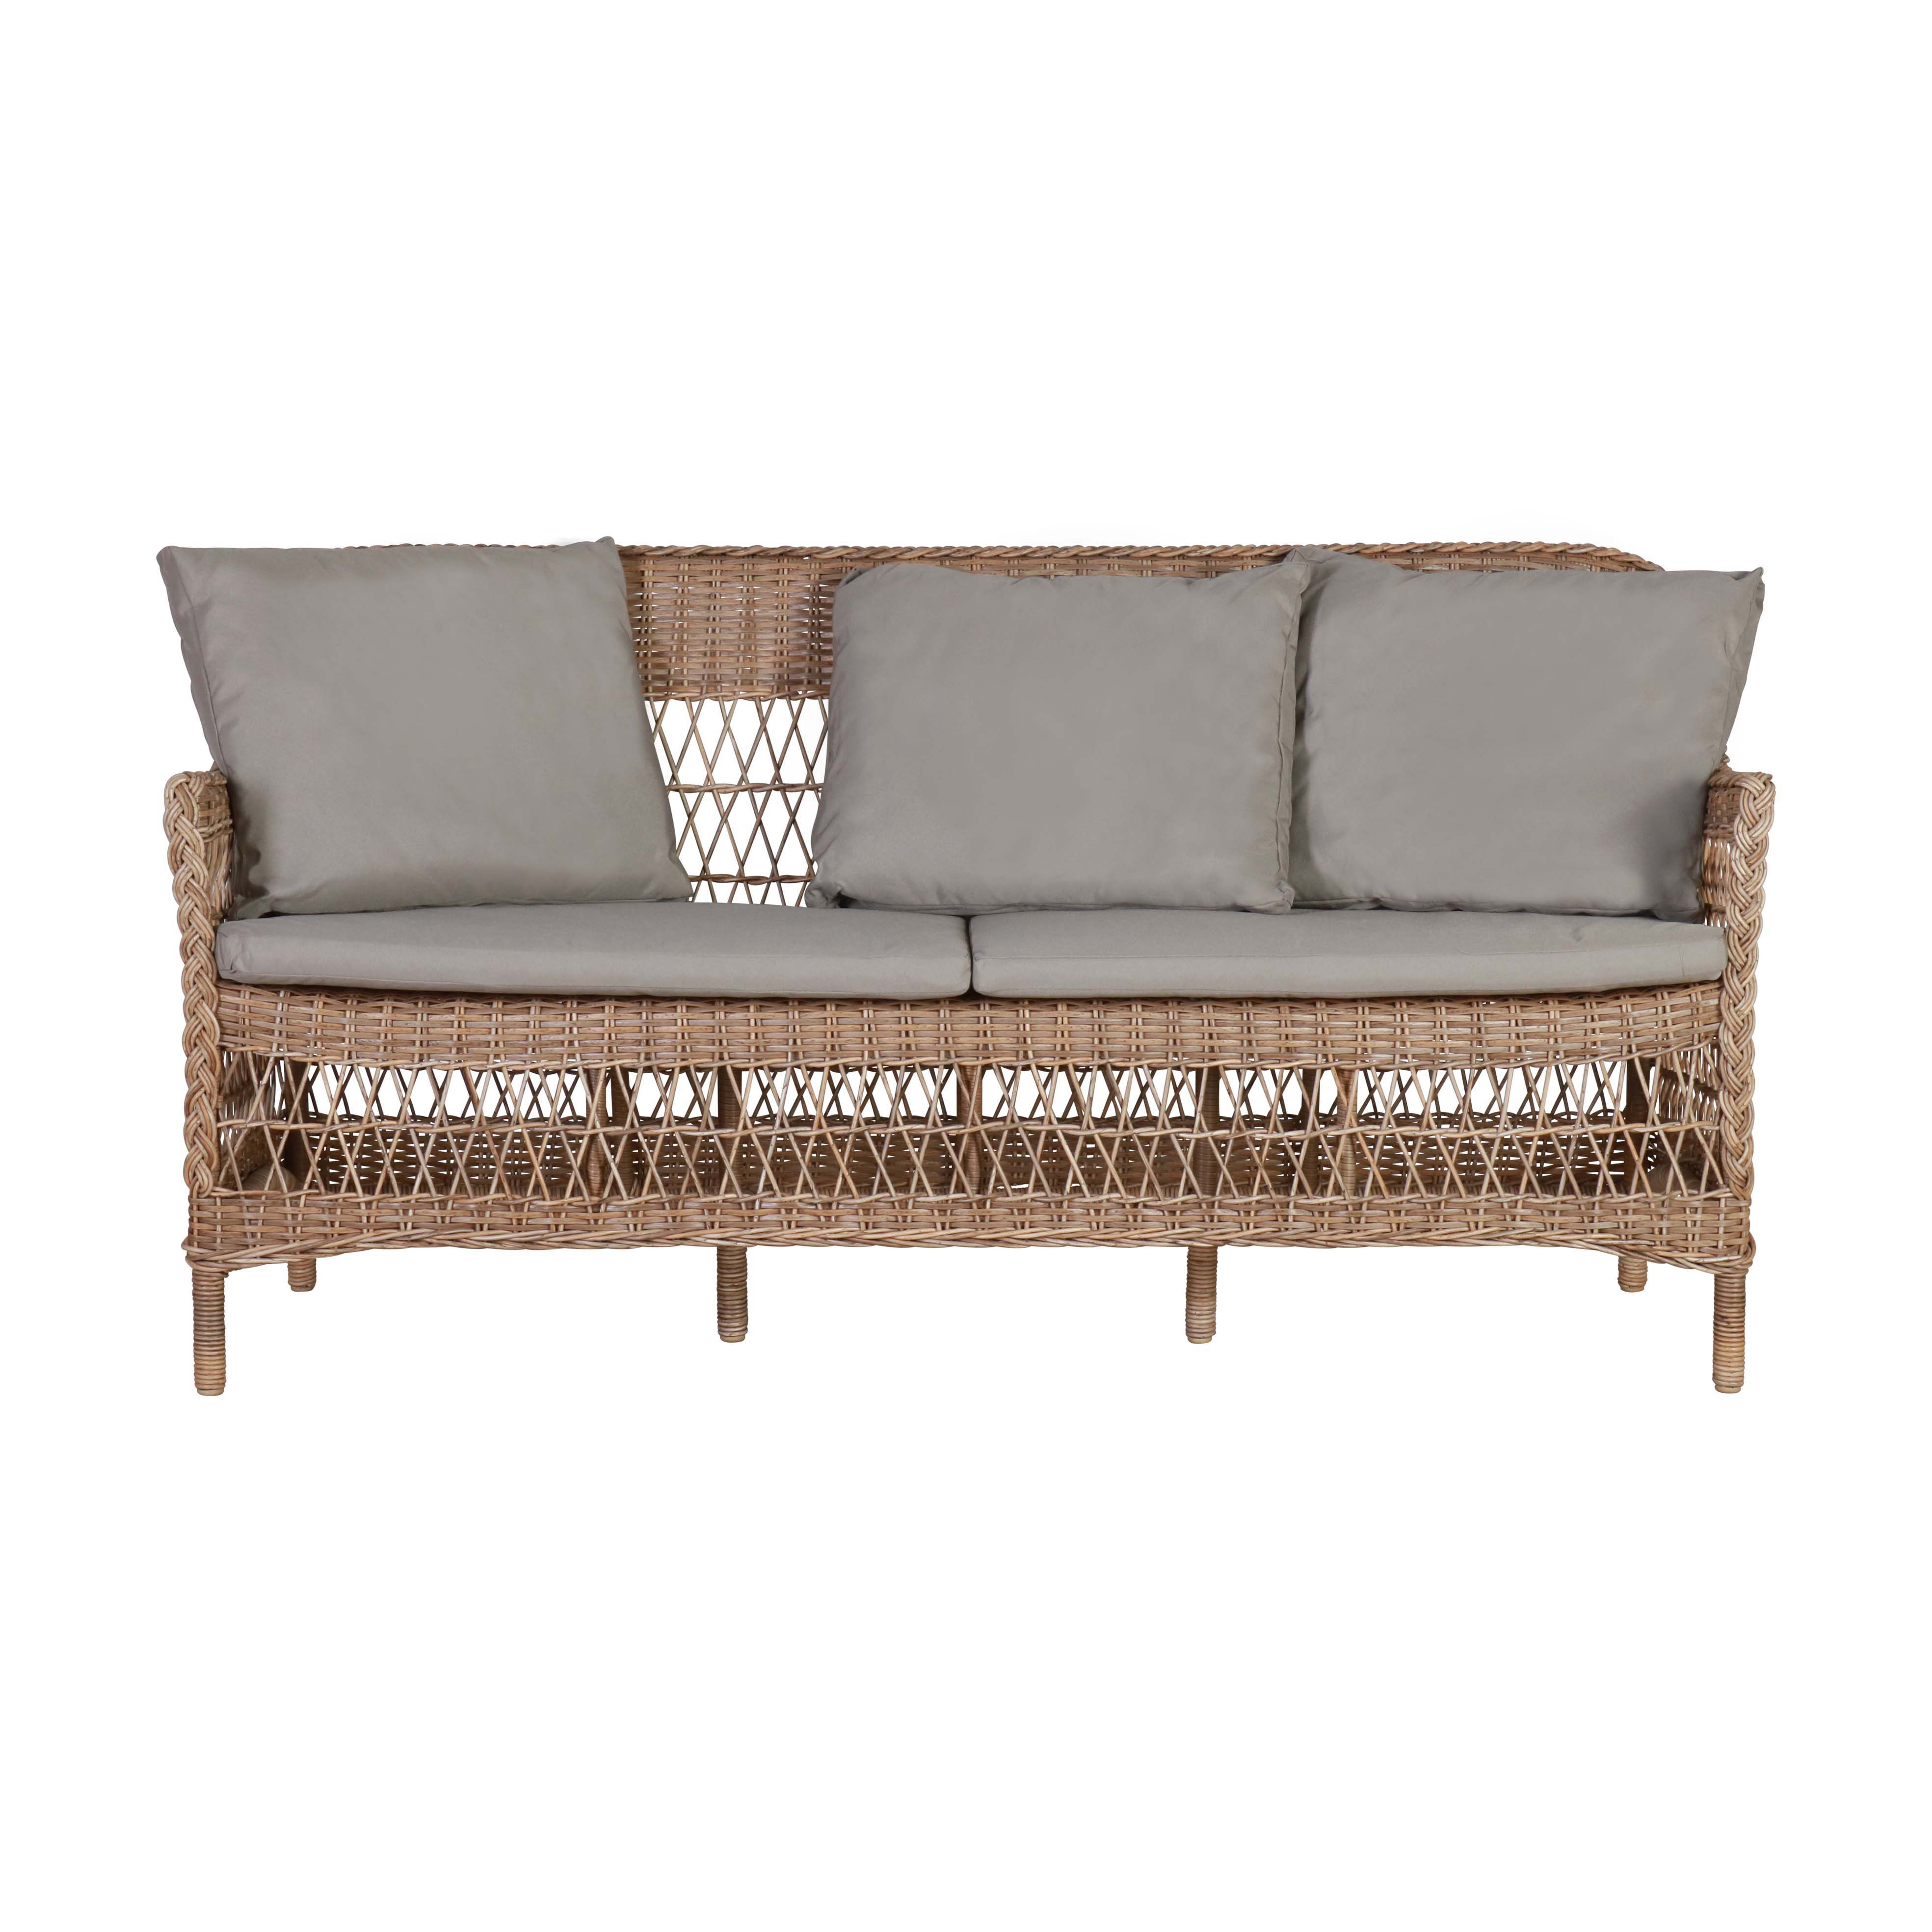 3 seater outdoor sofa with cushions 